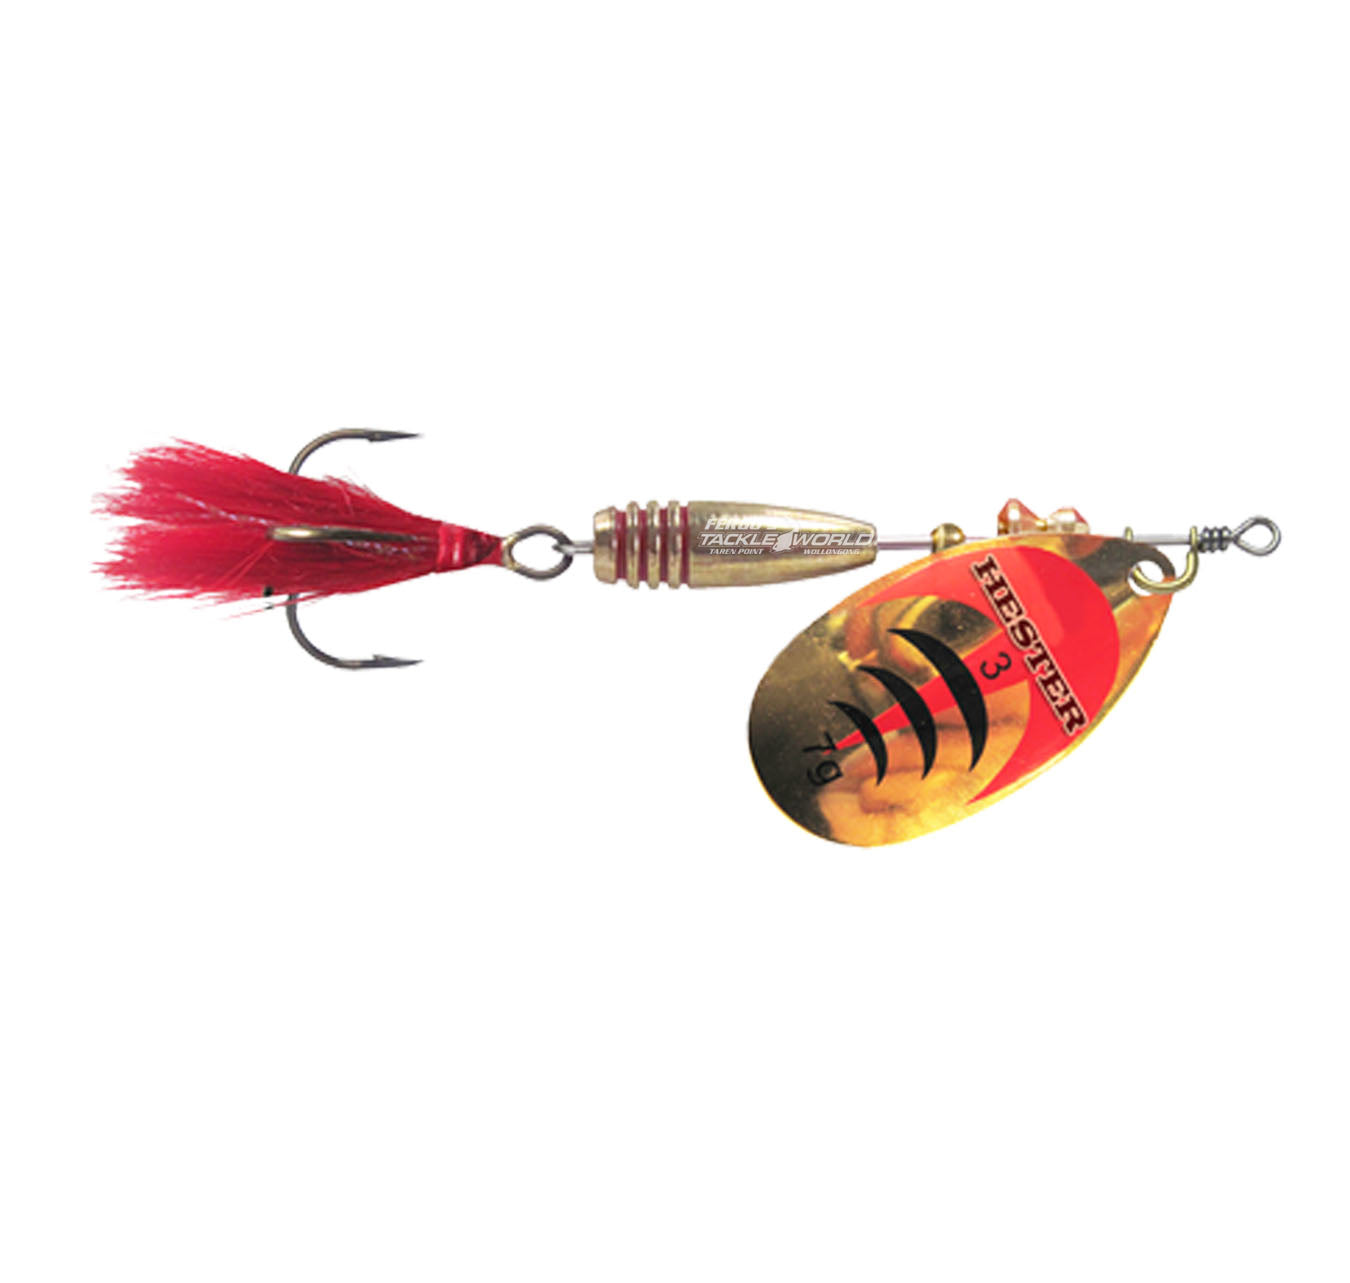 Trout Lures & Spinners Page 3 - Fergo's Tackle World